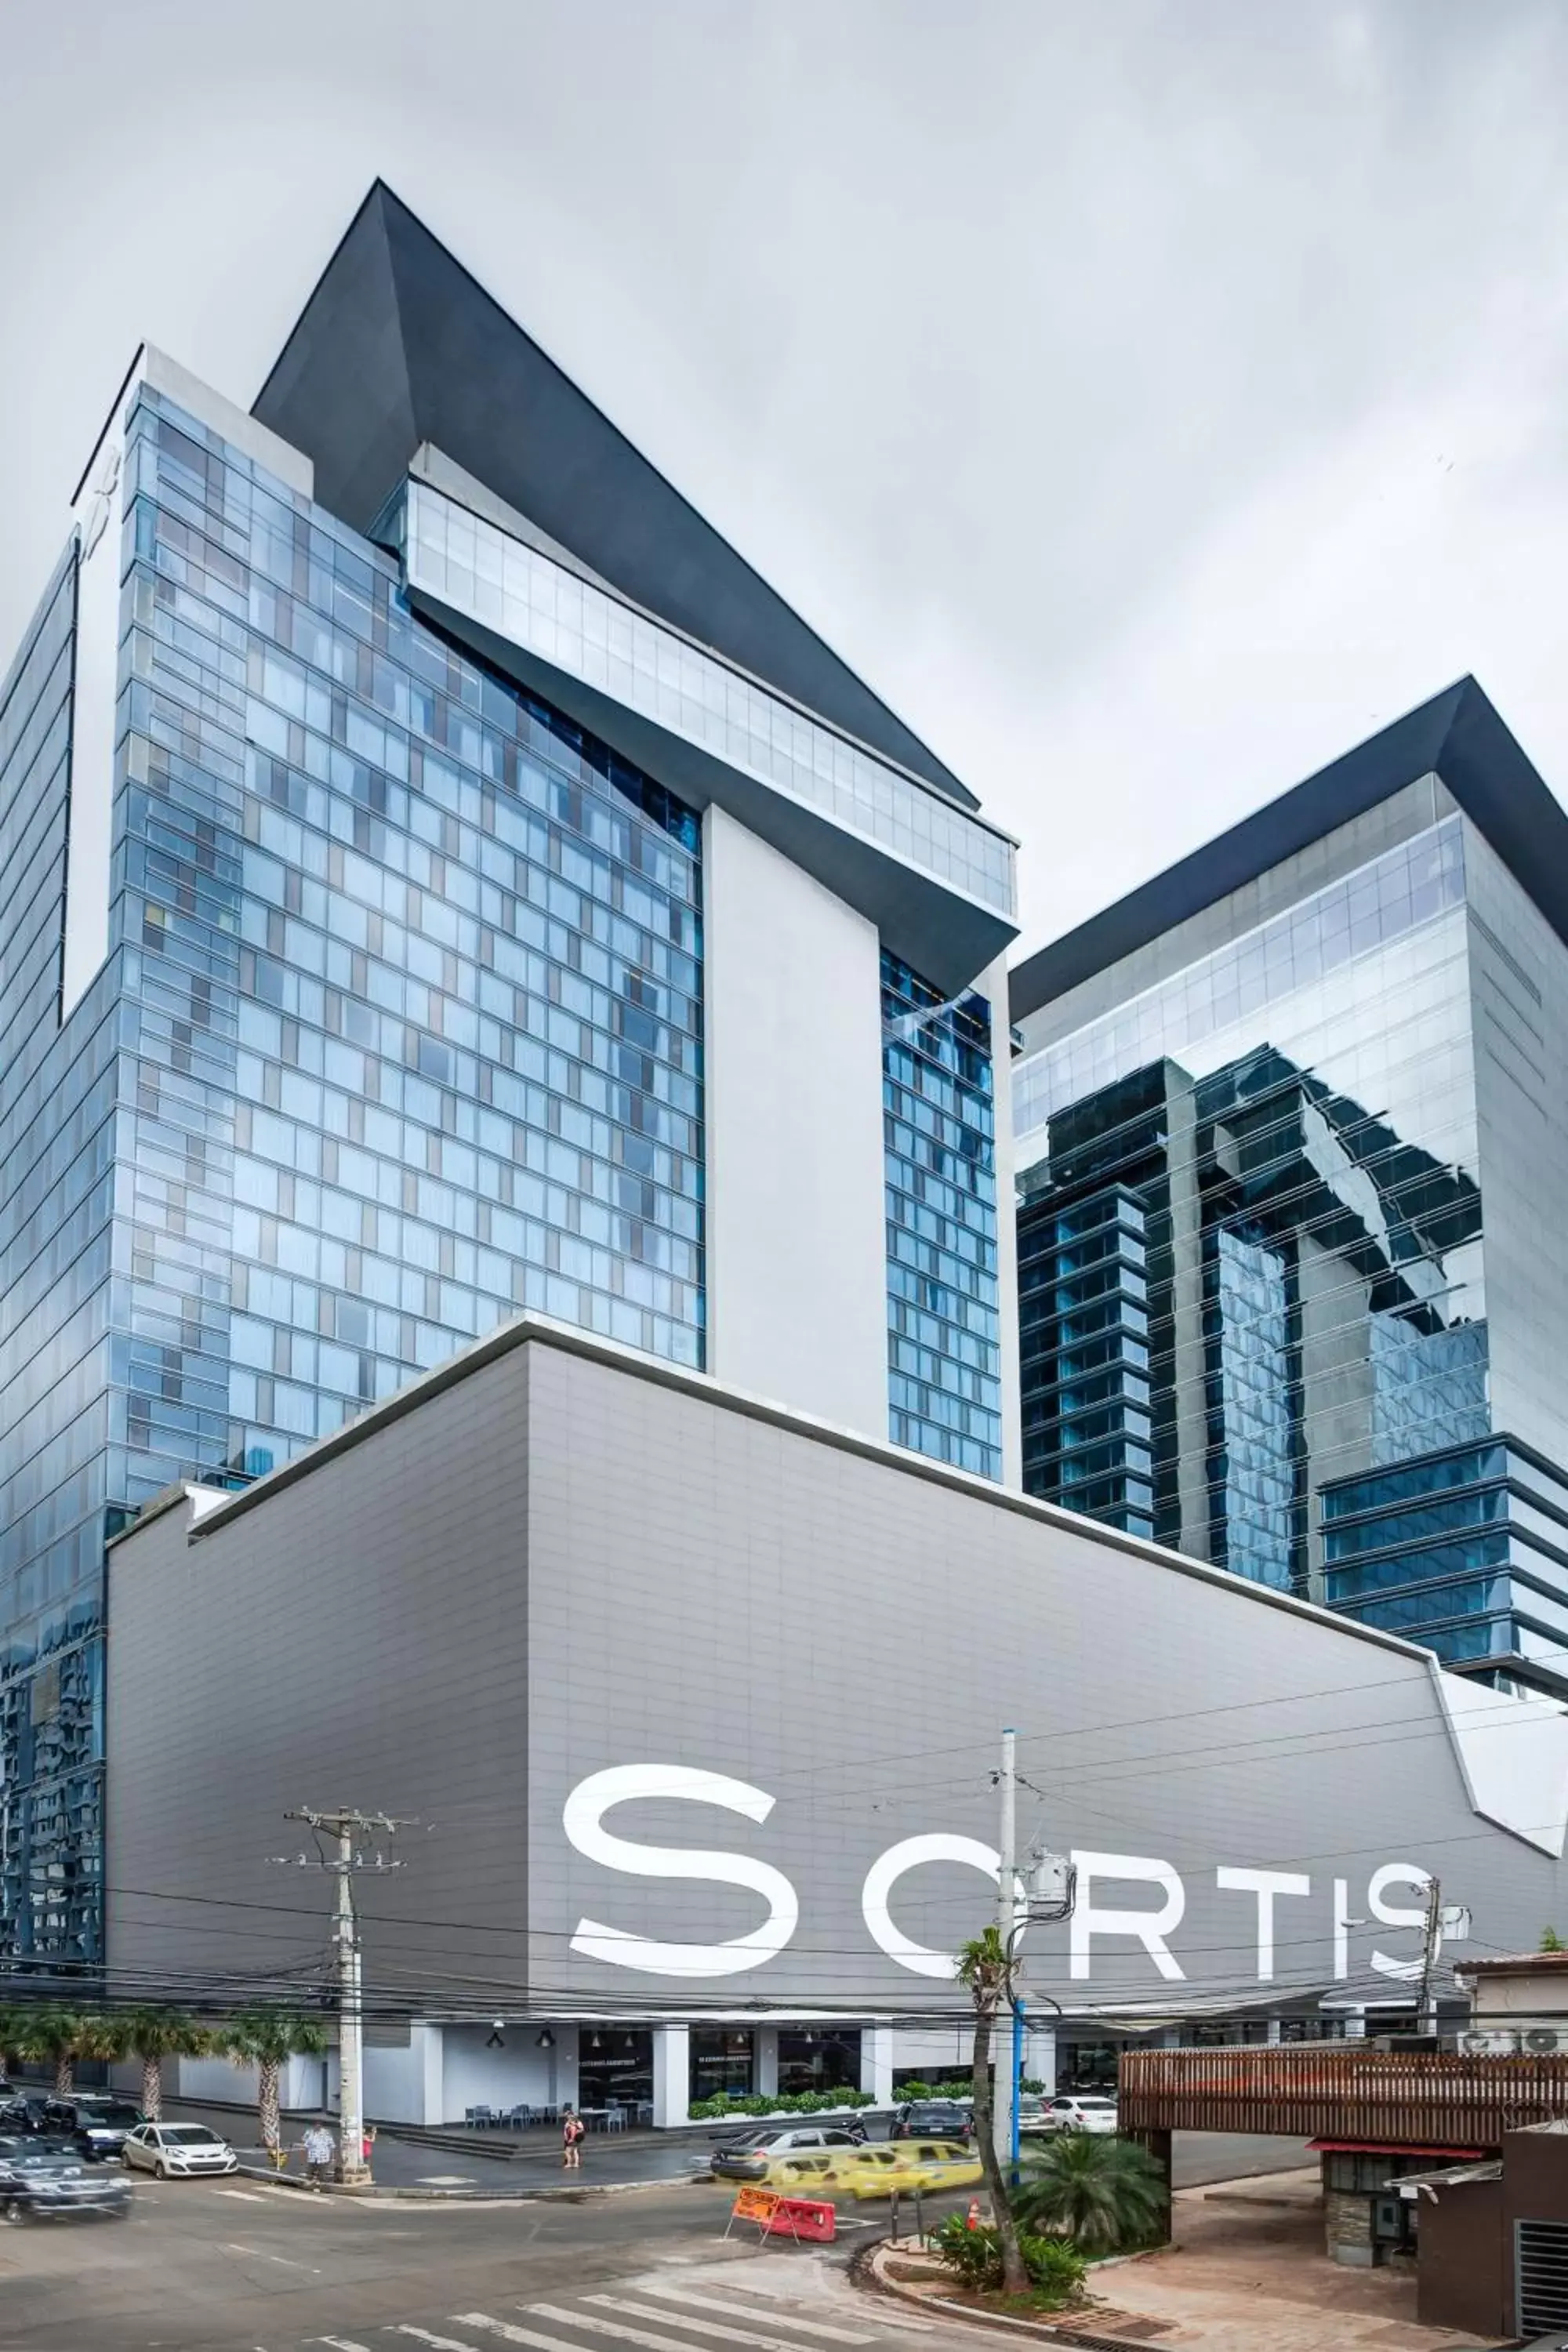 Property Building in Sortis Hotel, Spa & Casino, Autograph Collection